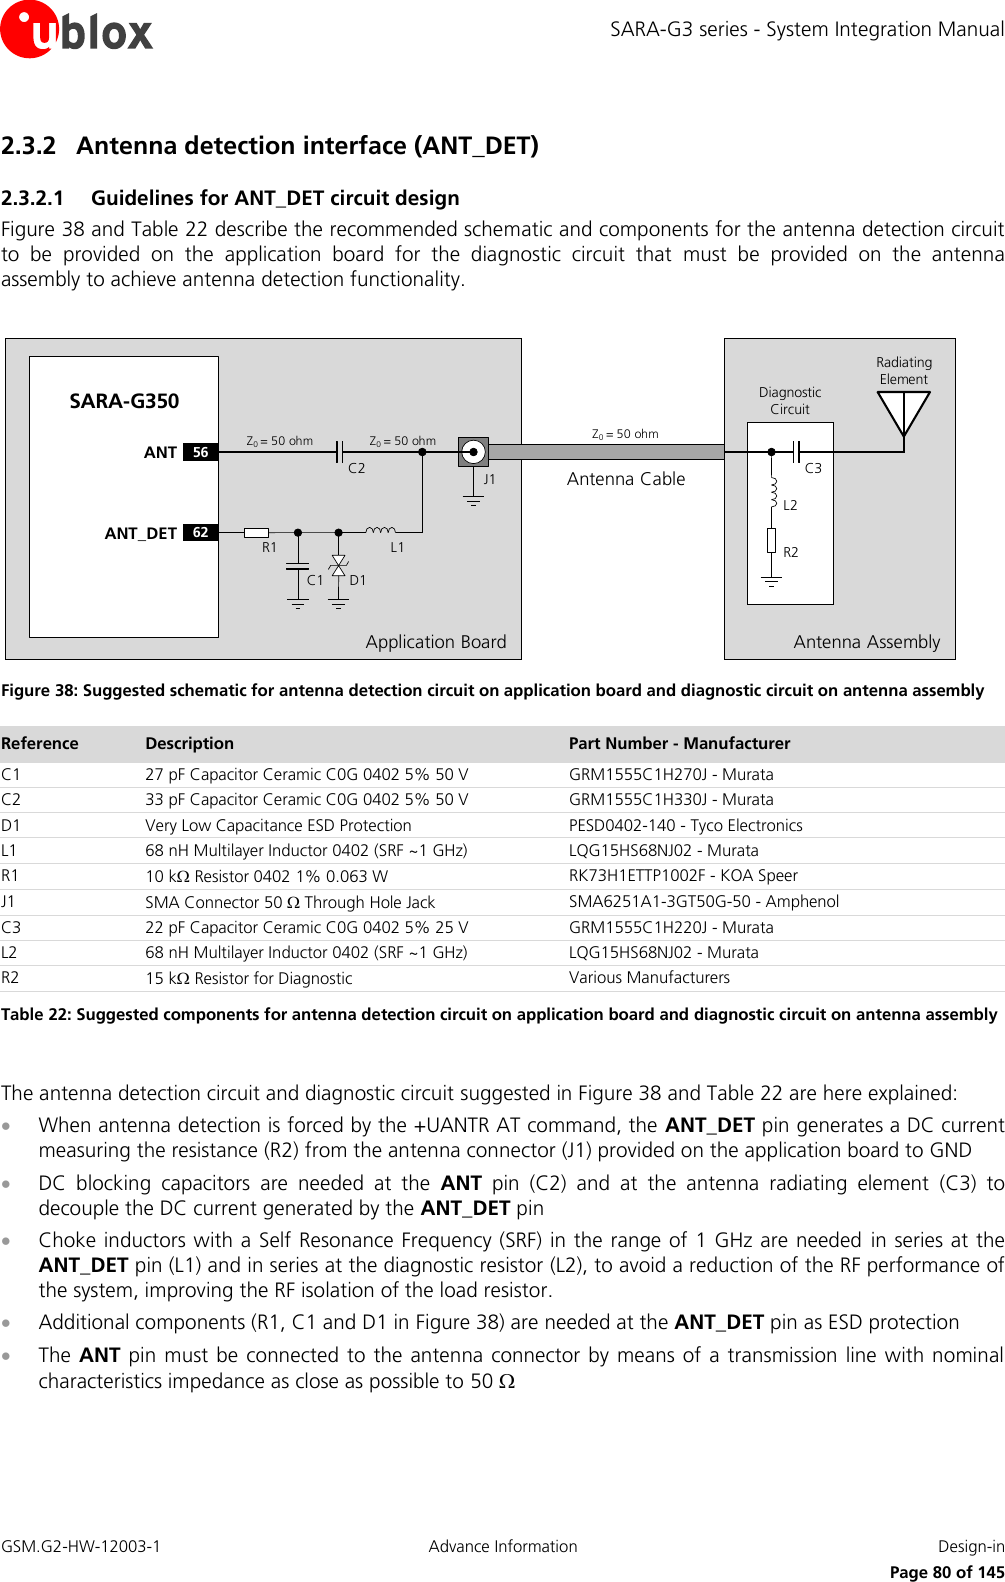 SARA-G3 series - System Integration Manual GSM.G2-HW-12003-1  Advance Information  Design-in     Page 80 of 145 2.3.2 Antenna detection interface (ANT_DET) 2.3.2.1 Guidelines for ANT_DET circuit design Figure 38 and Table 22 describe the recommended schematic and components for the antenna detection circuit to  be  provided  on  the  application  board  for  the  diagnostic  circuit  that  must  be  provided  on  the  antenna assembly to achieve antenna detection functionality.  Application BoardAntenna CableSARA-G35056ANT62ANT_DET R1C1 D1L1C2 J1Z0= 50 ohm Z0= 50 ohm Z0= 50 ohmAntenna AssemblyR2C3L2Radiating ElementDiagnostic Circuit Figure 38: Suggested schematic for antenna detection circuit on application board and diagnostic circuit on antenna assembly Reference Description Part Number - Manufacturer C1 27 pF Capacitor Ceramic C0G 0402 5% 50 V GRM1555C1H270J - Murata C2 33 pF Capacitor Ceramic C0G 0402 5% 50 V GRM1555C1H330J - Murata D1 Very Low Capacitance ESD Protection PESD0402-140 - Tyco Electronics L1 68 nH Multilayer Inductor 0402 (SRF ~1 GHz) LQG15HS68NJ02 - Murata R1 10 k Resistor 0402 1% 0.063 W RK73H1ETTP1002F - KOA Speer J1 SMA Connector 50  Through Hole Jack SMA6251A1-3GT50G-50 - Amphenol C3 22 pF Capacitor Ceramic C0G 0402 5% 25 V  GRM1555C1H220J - Murata L2 68 nH Multilayer Inductor 0402 (SRF ~1 GHz) LQG15HS68NJ02 - Murata R2 15 k Resistor for Diagnostic Various Manufacturers Table 22: Suggested components for antenna detection circuit on application board and diagnostic circuit on antenna assembly  The antenna detection circuit and diagnostic circuit suggested in Figure 38 and Table 22 are here explained:  When antenna detection is forced by the +UANTR AT command, the ANT_DET pin generates a DC current measuring the resistance (R2) from the antenna connector (J1) provided on the application board to GND  DC  blocking  capacitors  are  needed  at  the  ANT  pin  (C2)  and  at  the  antenna  radiating  element  (C3)  to decouple the DC current generated by the ANT_DET pin  Choke inductors with a Self Resonance Frequency (SRF) in the range of 1 GHz are needed  in series at the ANT_DET pin (L1) and in series at the diagnostic resistor (L2), to avoid a reduction of the RF performance of the system, improving the RF isolation of the load resistor.   Additional components (R1, C1 and D1 in Figure 38) are needed at the ANT_DET pin as ESD protection  The ANT pin must  be connected to the  antenna connector  by  means of  a transmission line with  nominal characteristics impedance as close as possible to 50   